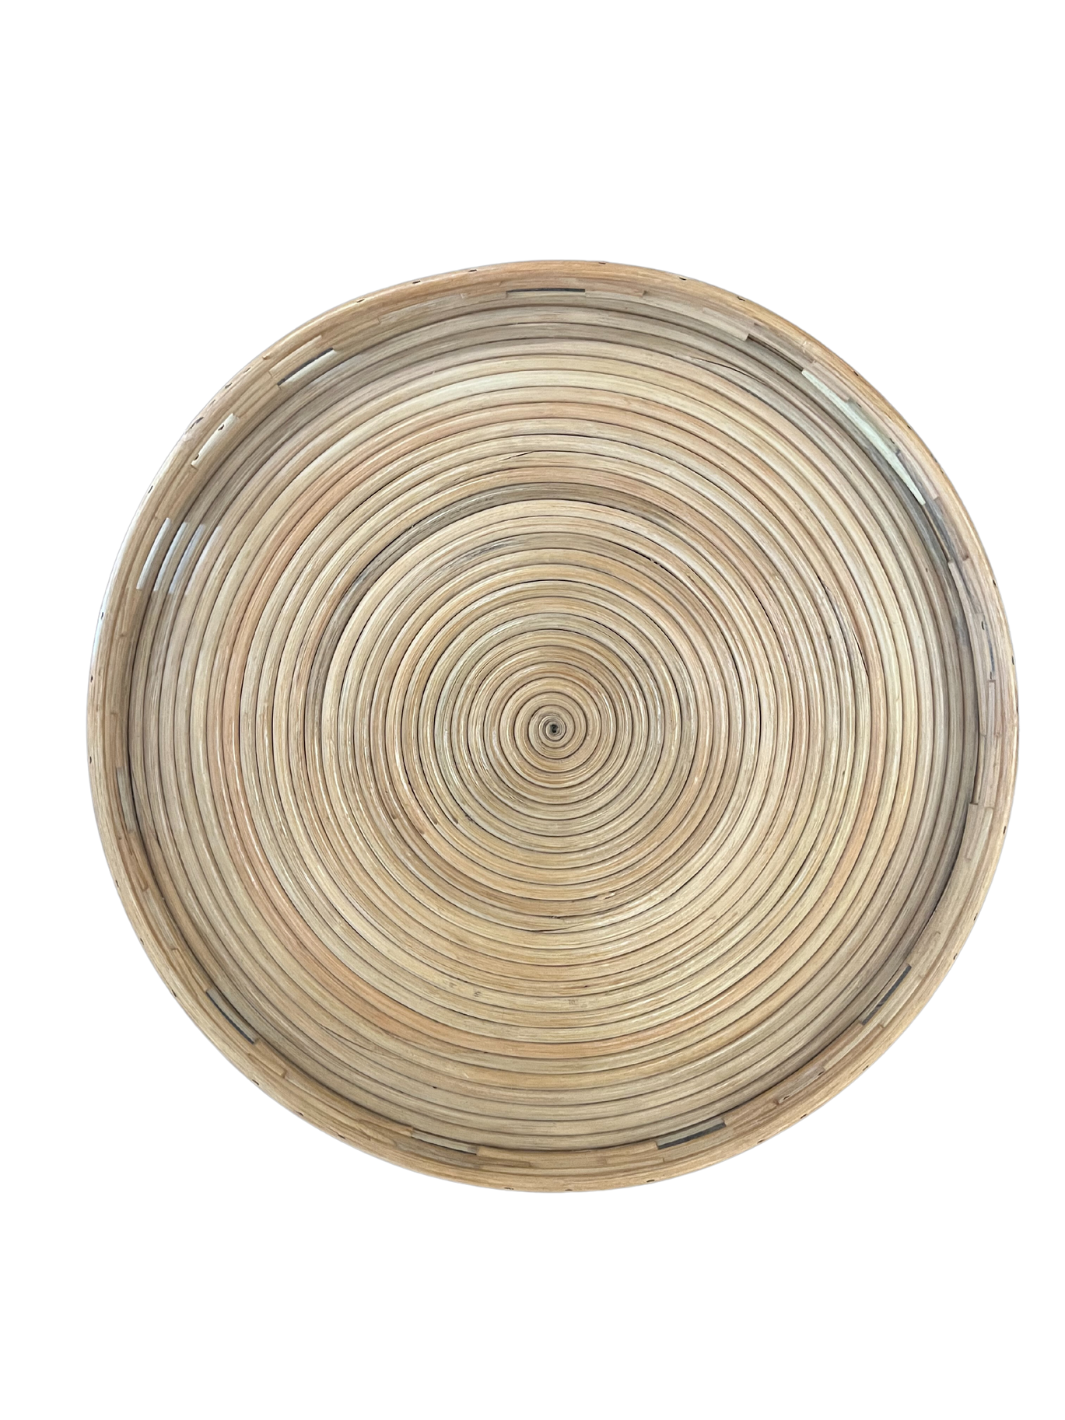 Large Woven Bamboo Tray